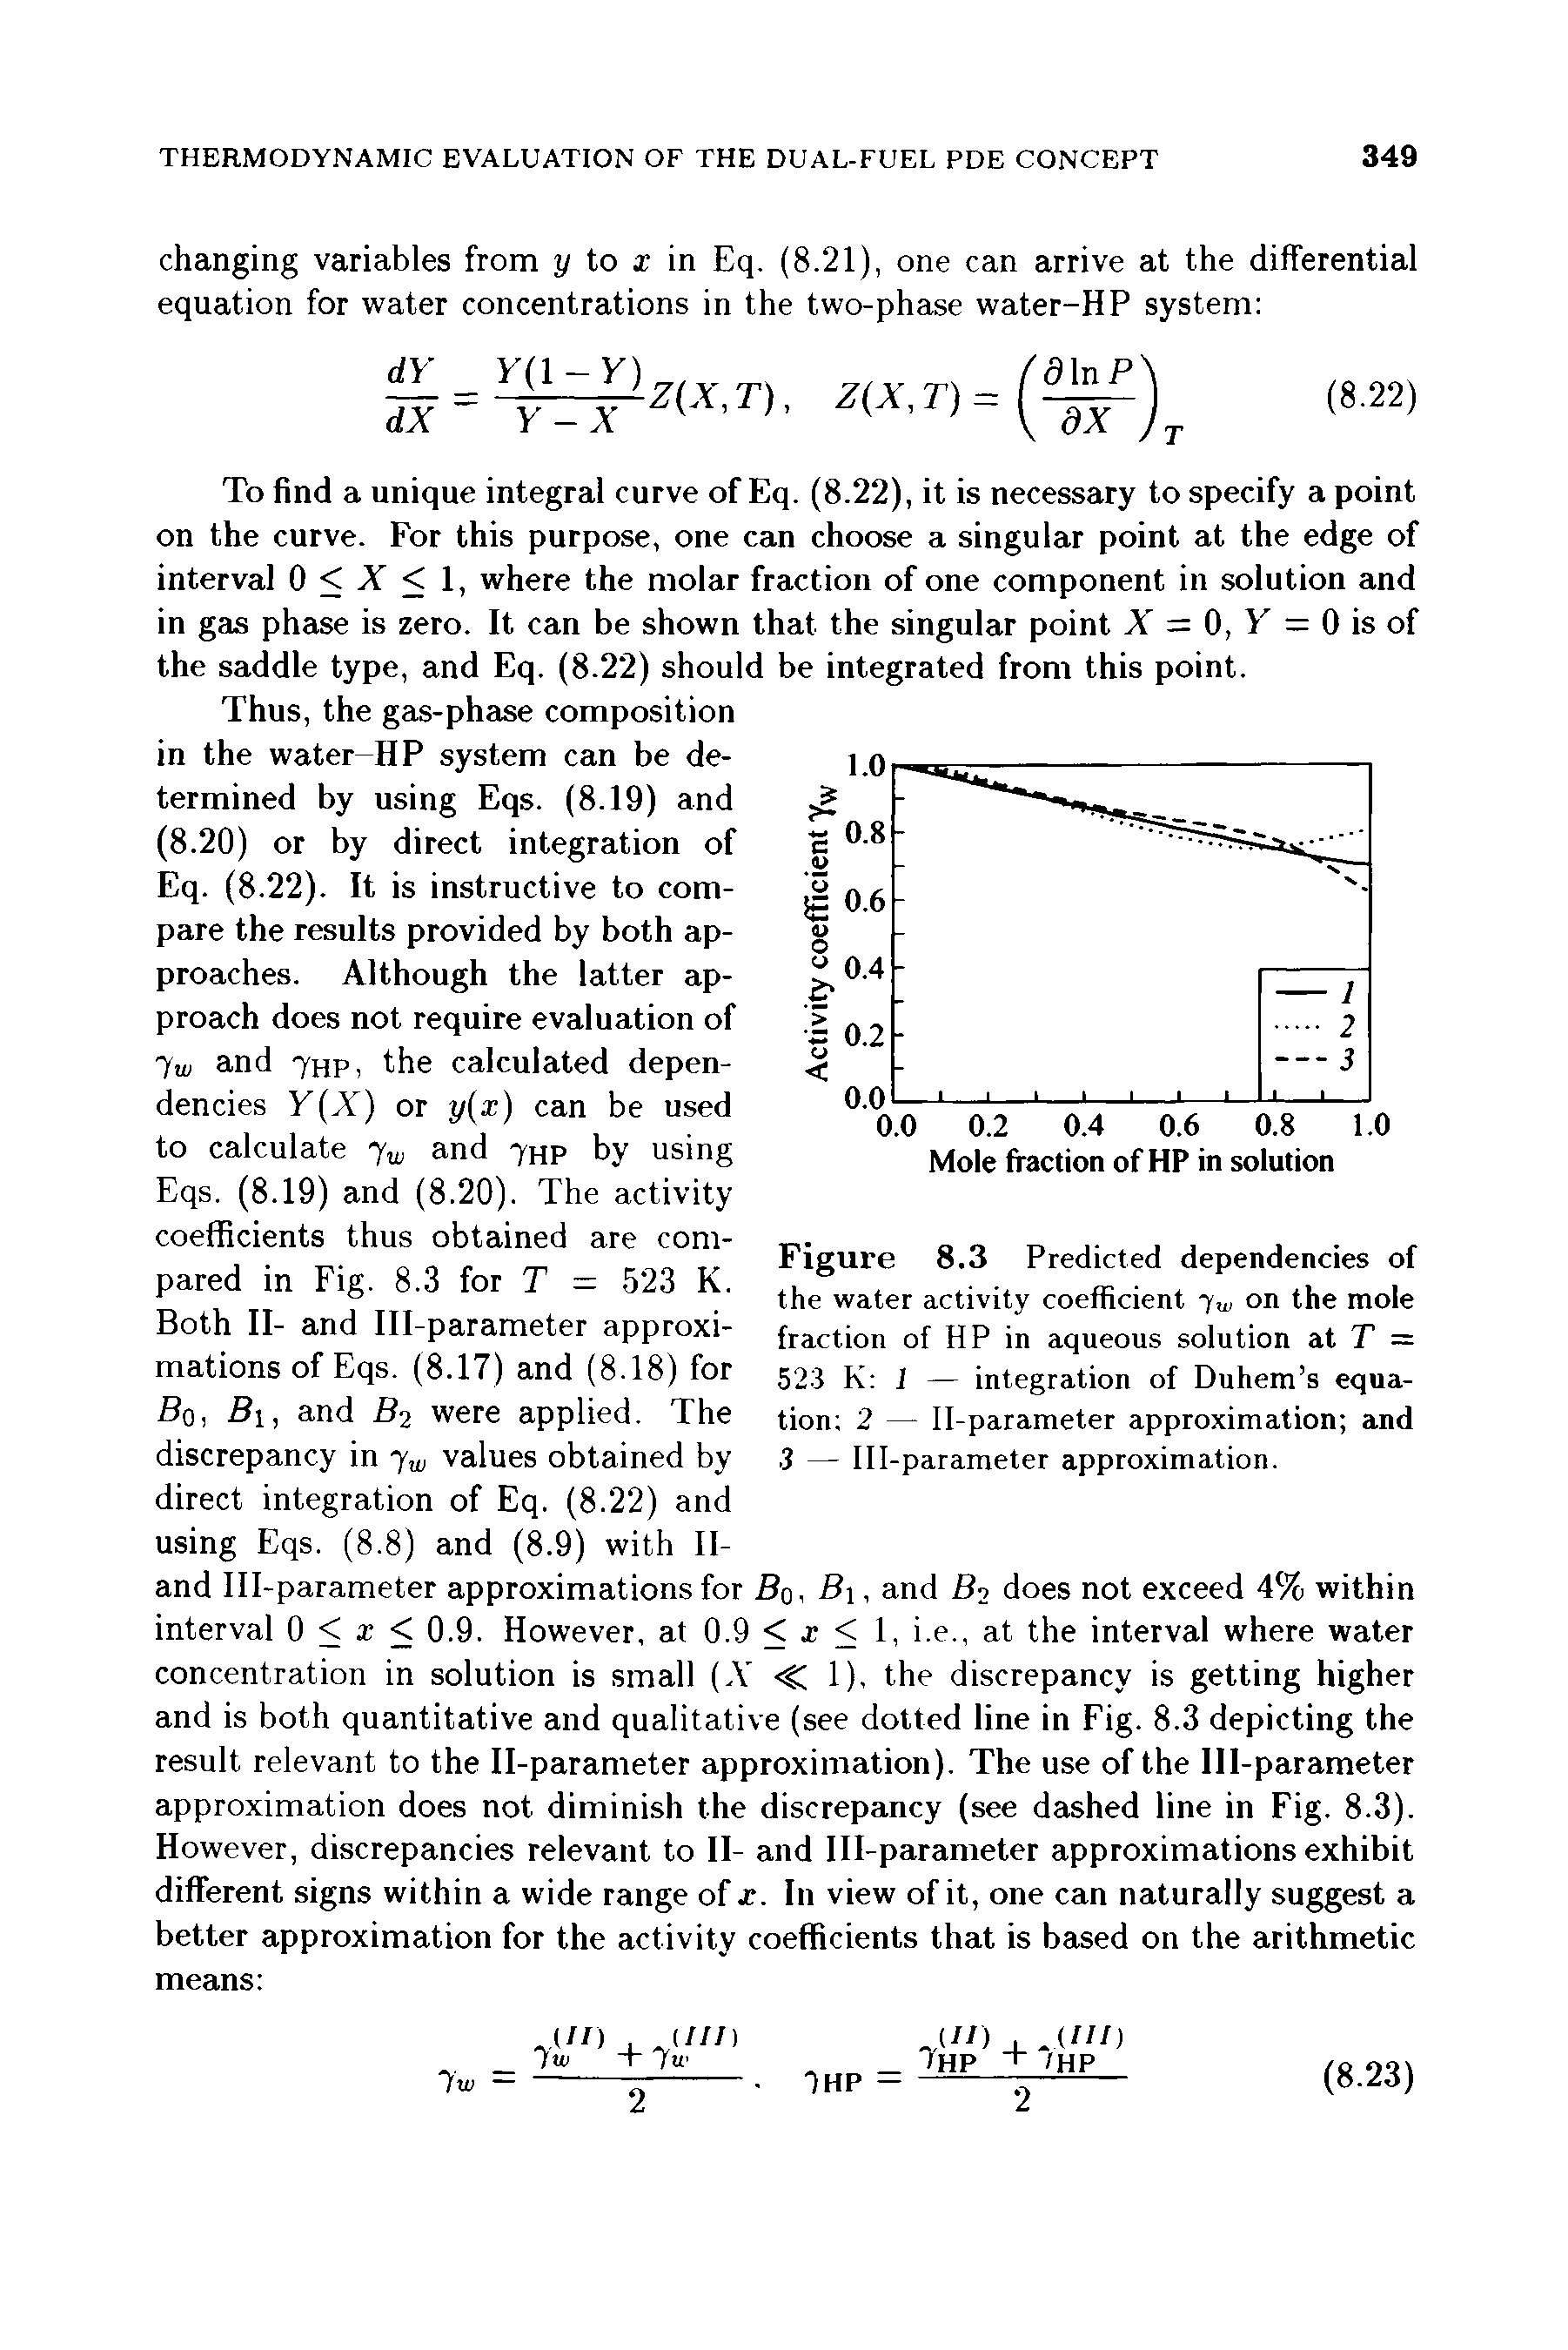 Figure 8.3 Predicted dependencies of the water activity coefficient jw on the mole fraction of HP in aqueous solution at T = 52 1 K i — integration of Duhem s equation 2 — Il-parameter approximation and 3 — Ill-parameter approximation.